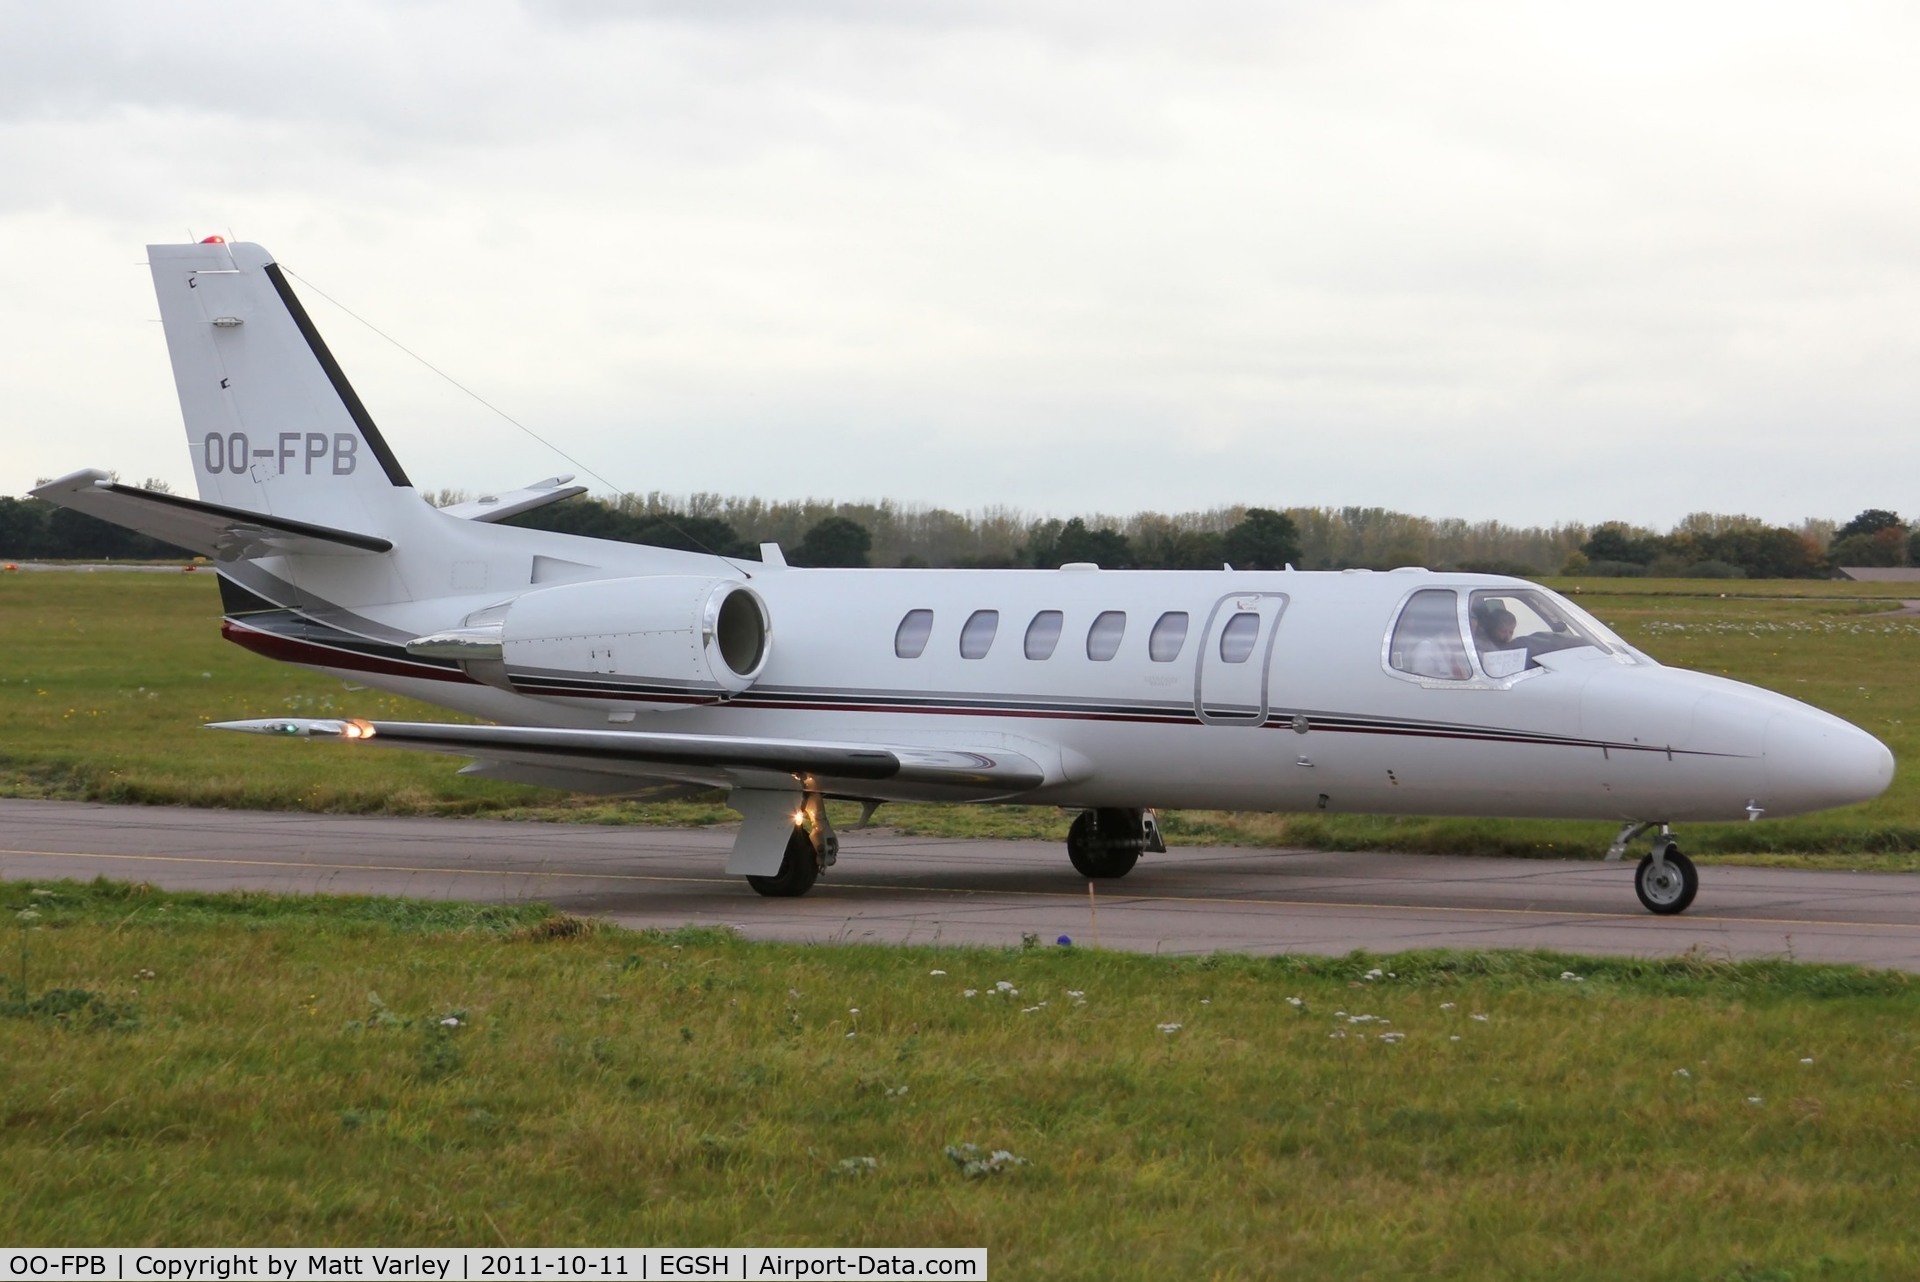 OO-FPB, 2005 Cessna 550B Citation Bravo C/N 550-1117, About to depart a dull EGSH